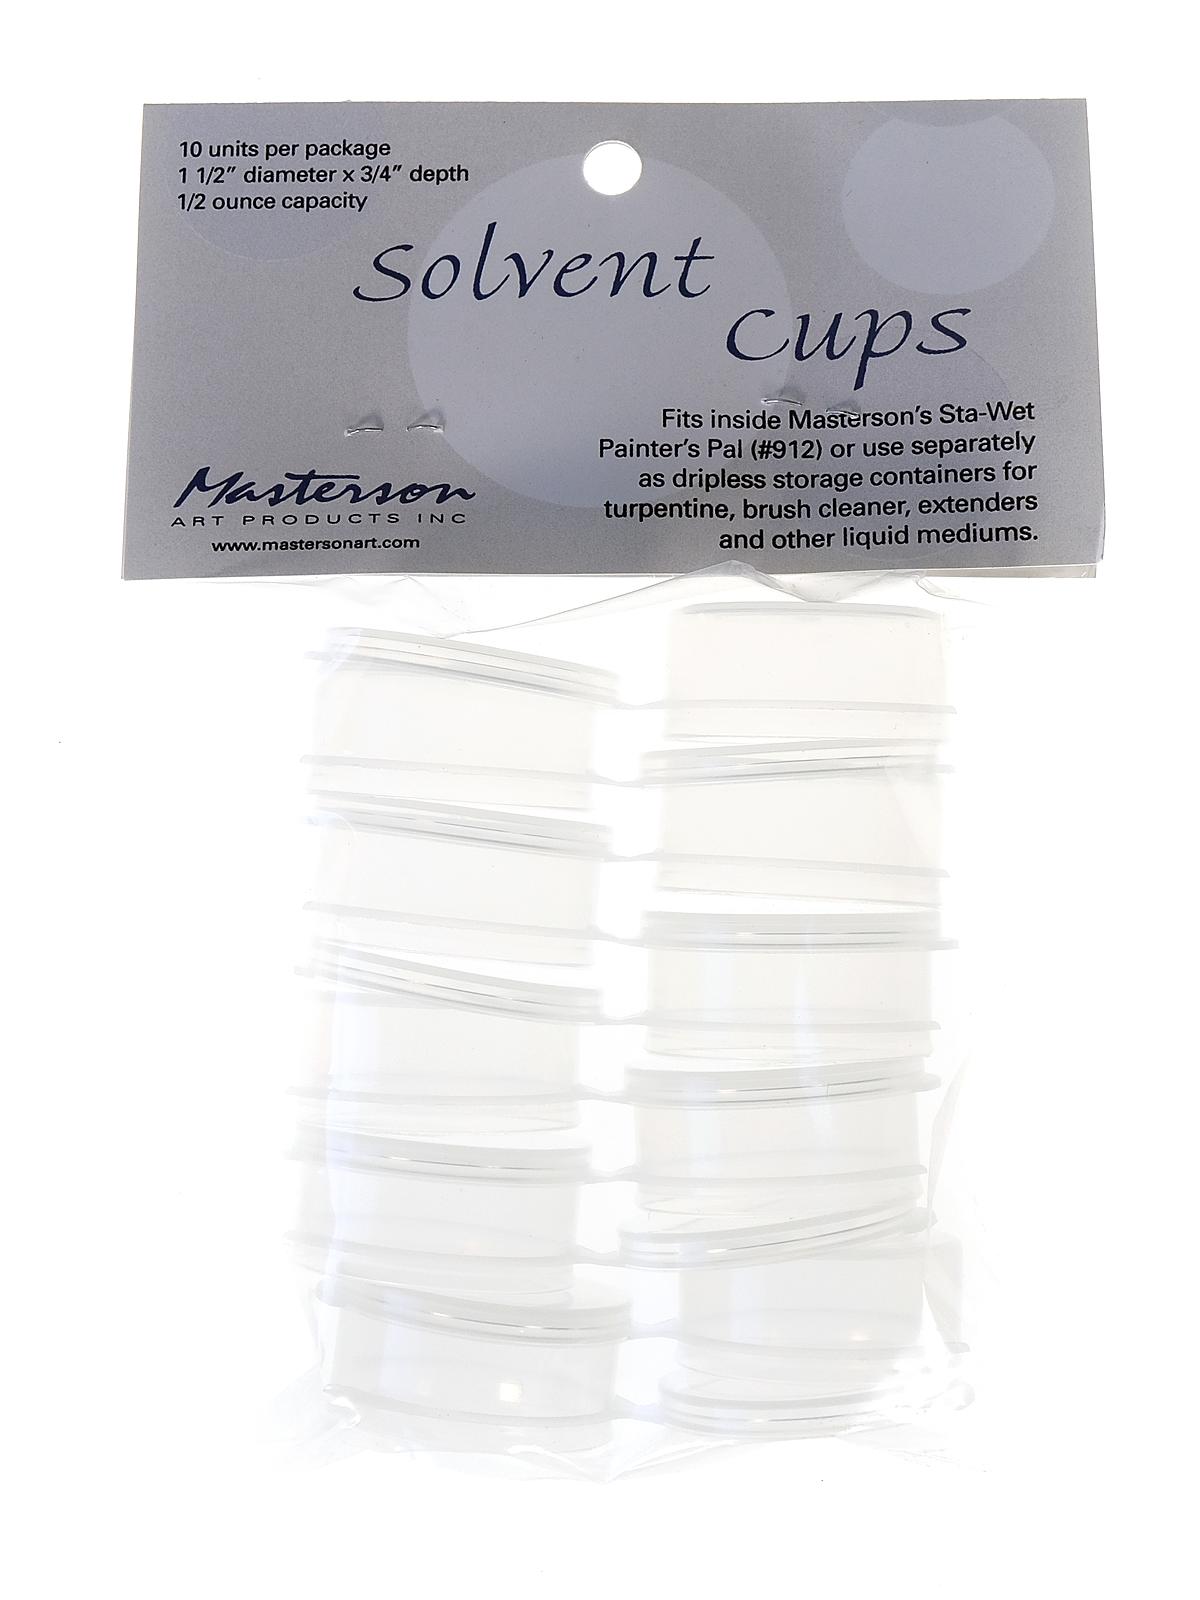 Sta-wet Painters Pal Palette Solvent Cups Pack Of 10